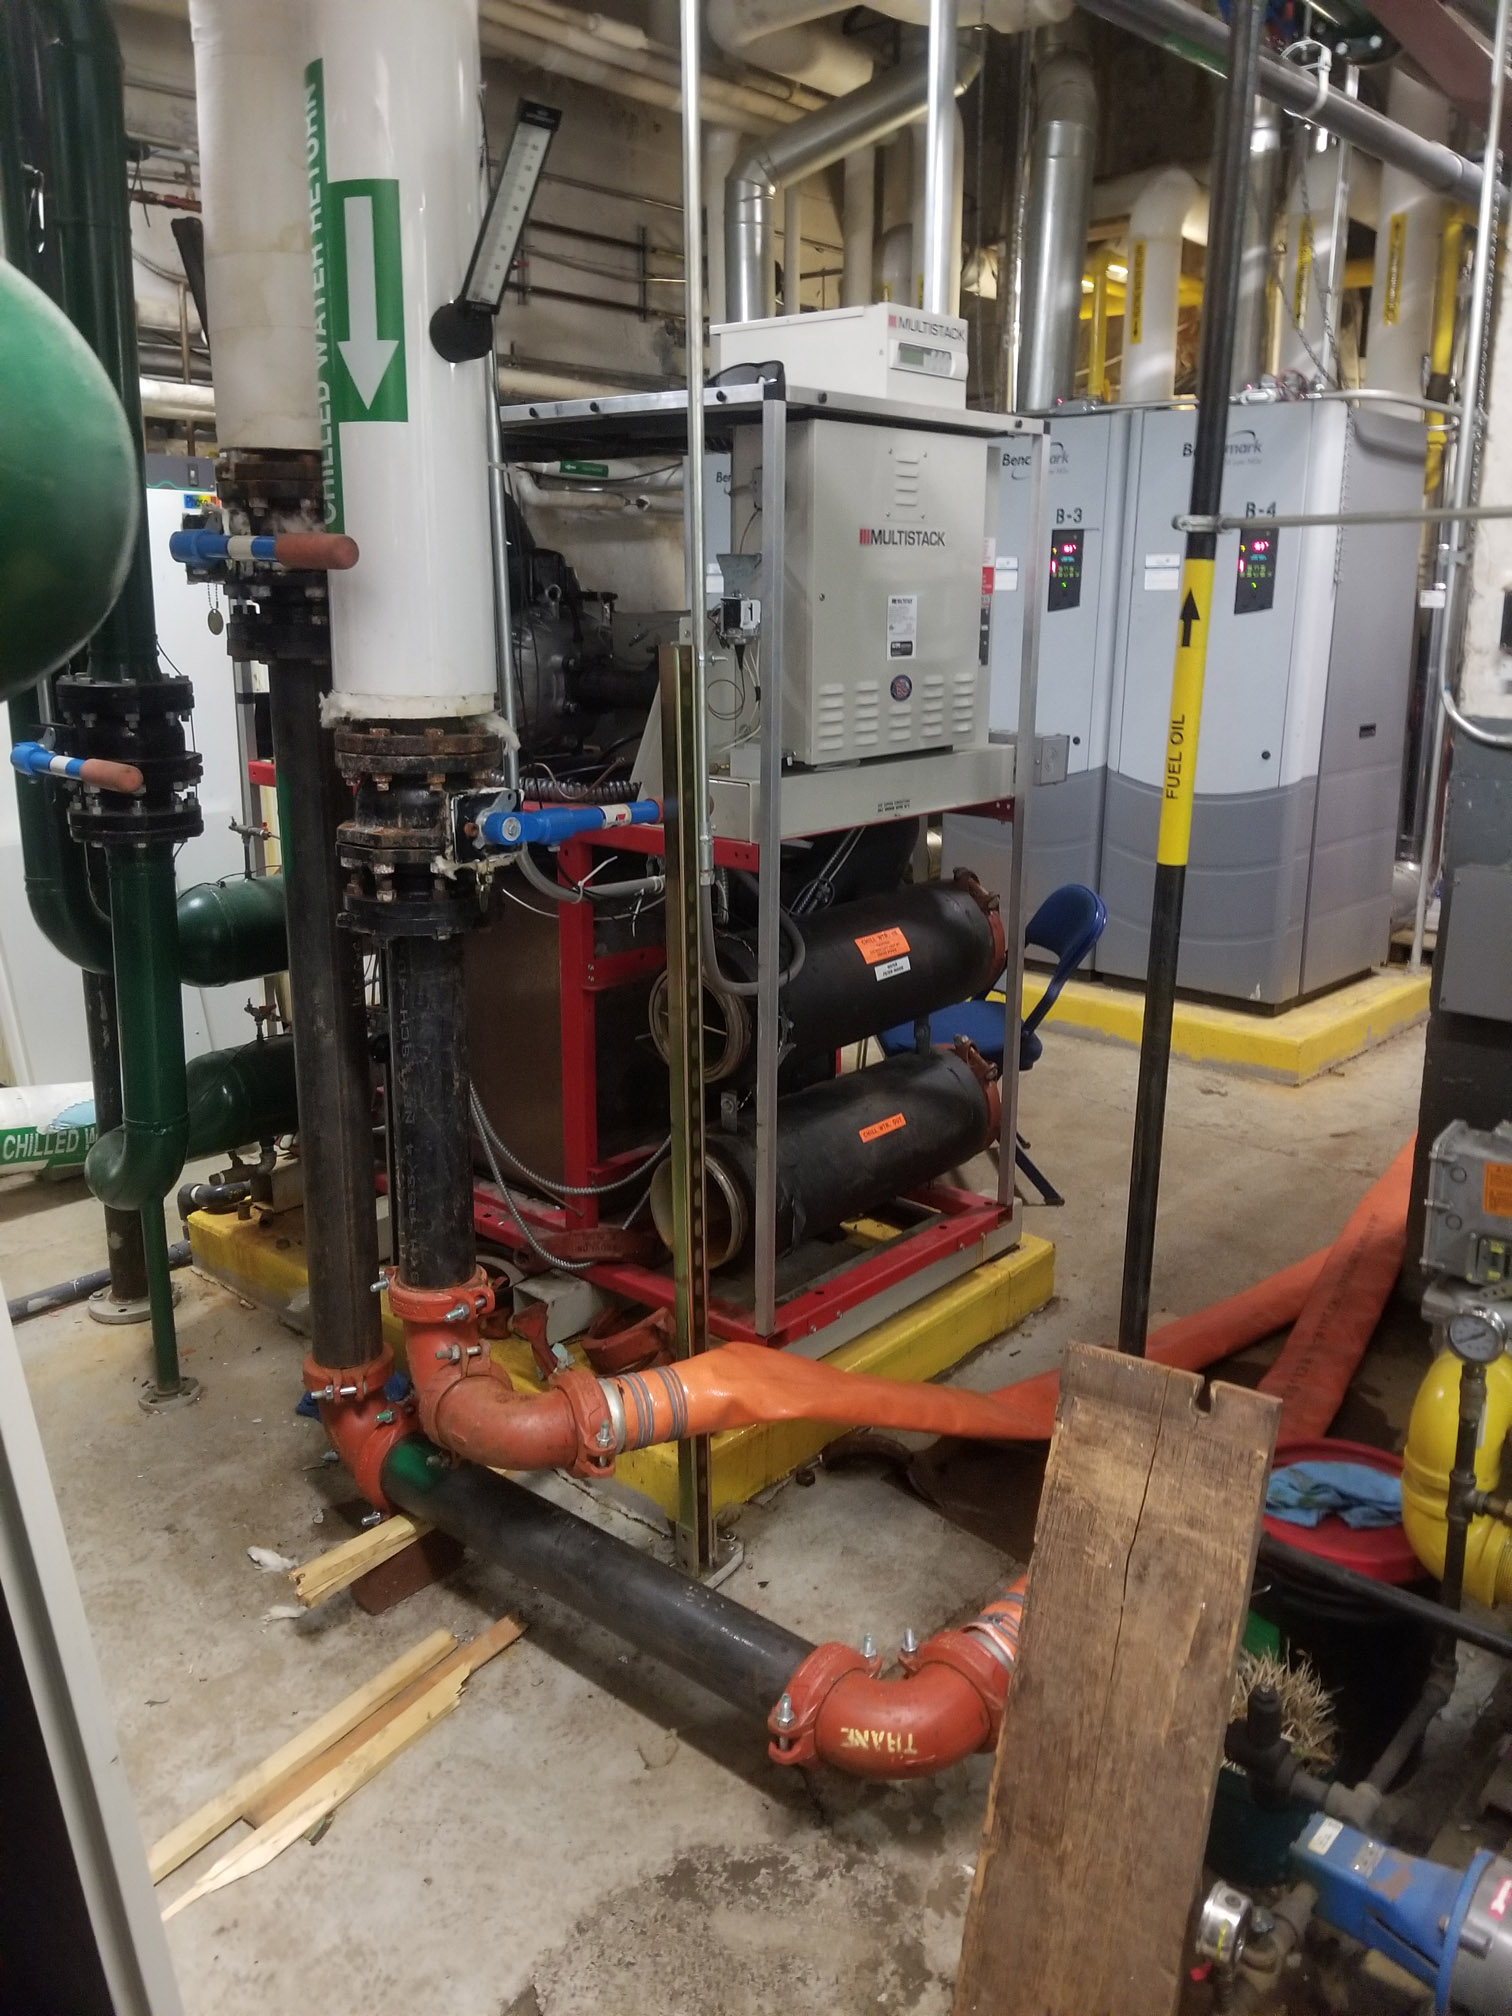 Air Cooled Chiller Rental Holmes County FL, Chiller AC Rental Holmes County FL, Temporary Chiller Holmes County FL, Rental Chiller Installation Holmes County FL